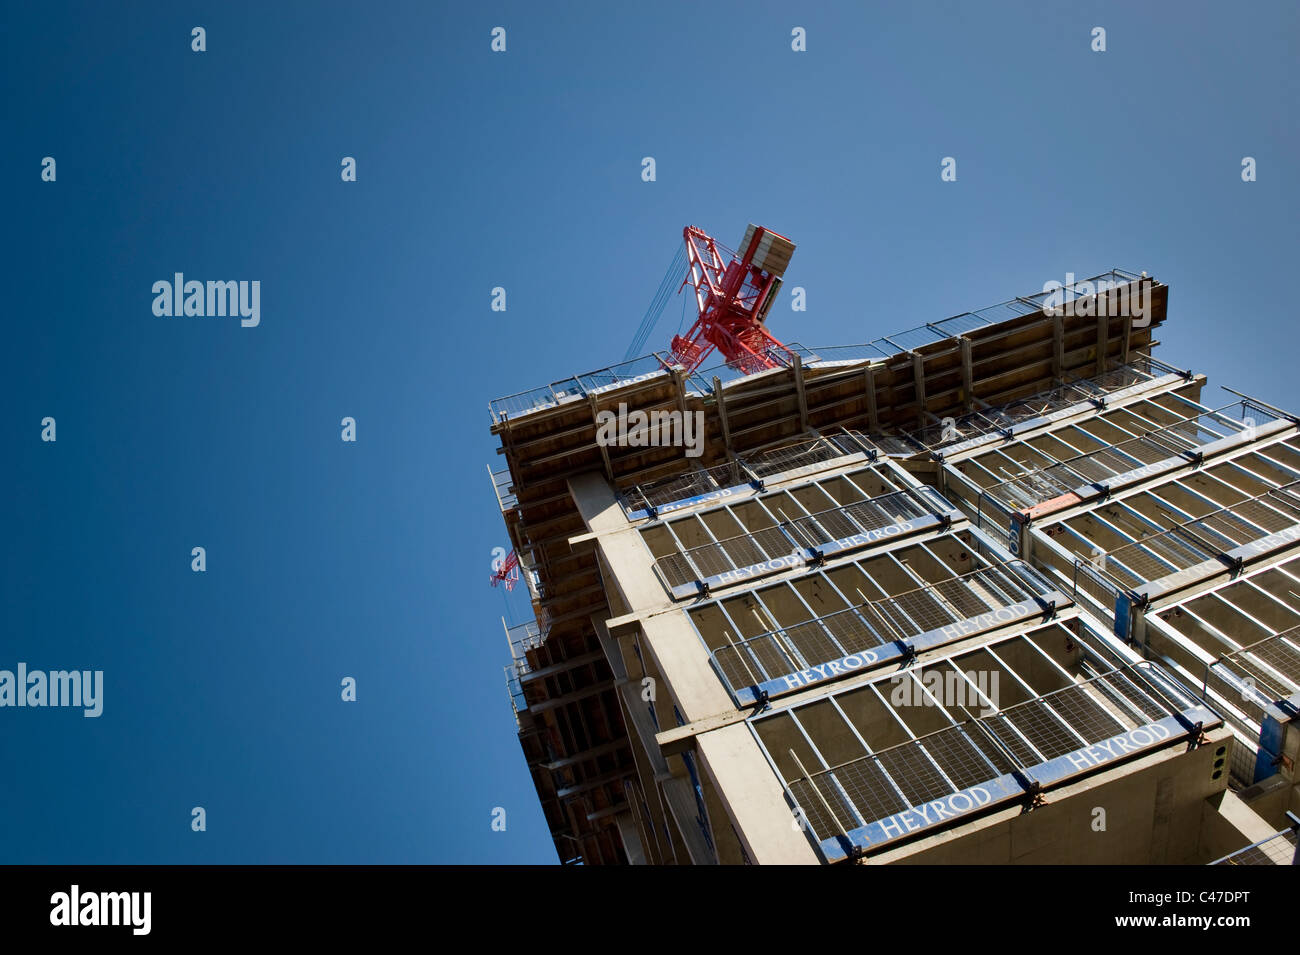 A building in construction by the company Heyrod, shot with a crane against a clear blue cloudless sky. Stock Photo